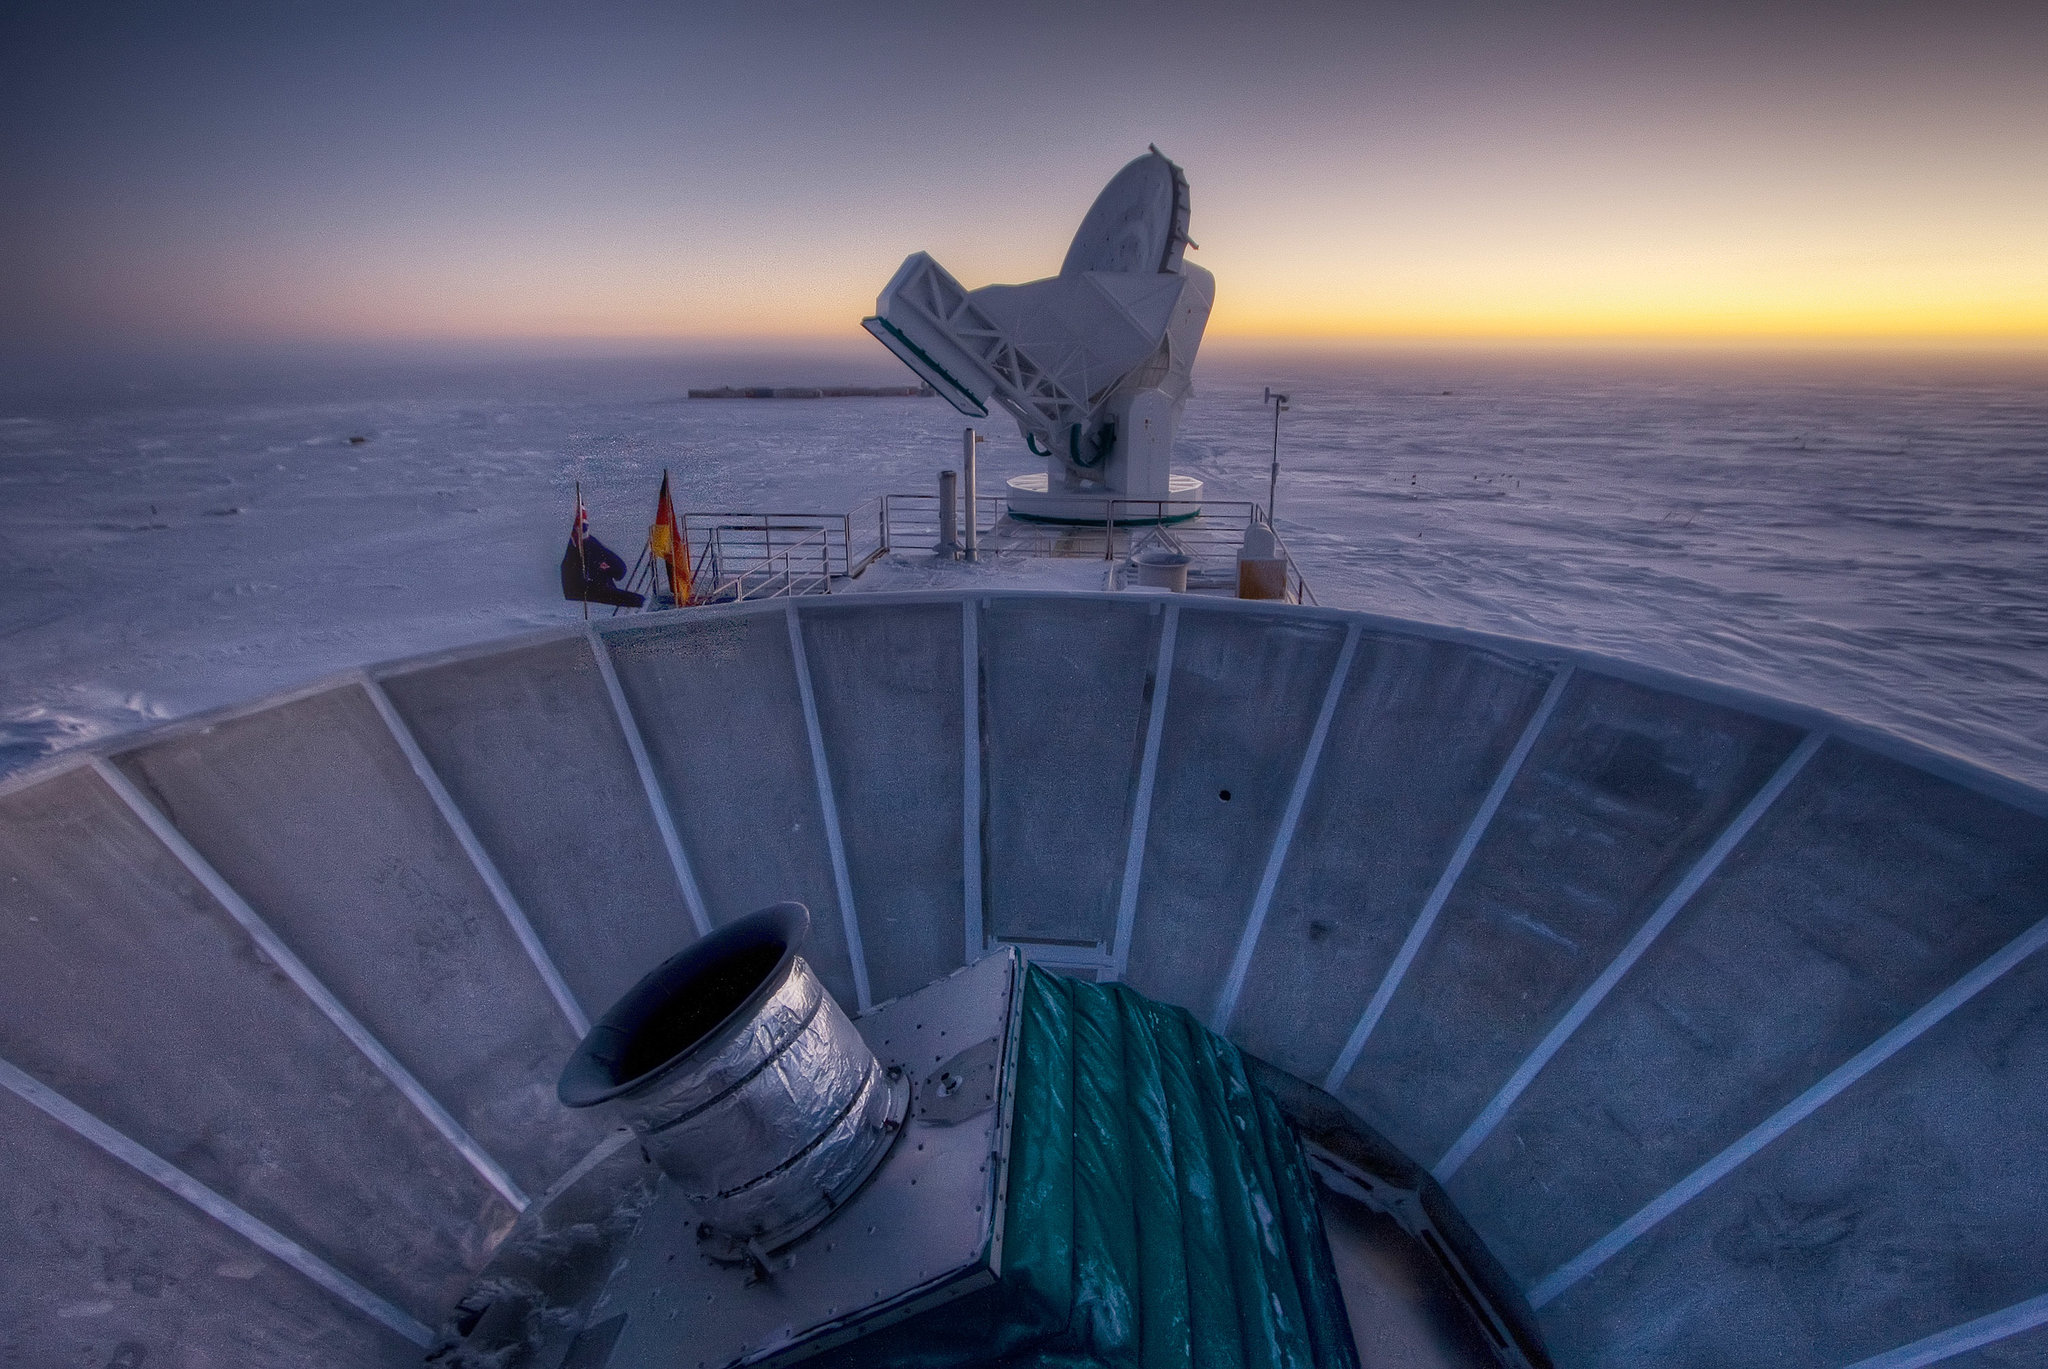 The Bicep2 telescope, in the foreground, was used to detect the faint
									 spiraling gravity patterns — the signature of a universe being wrenched
									 violently apart at its birth.